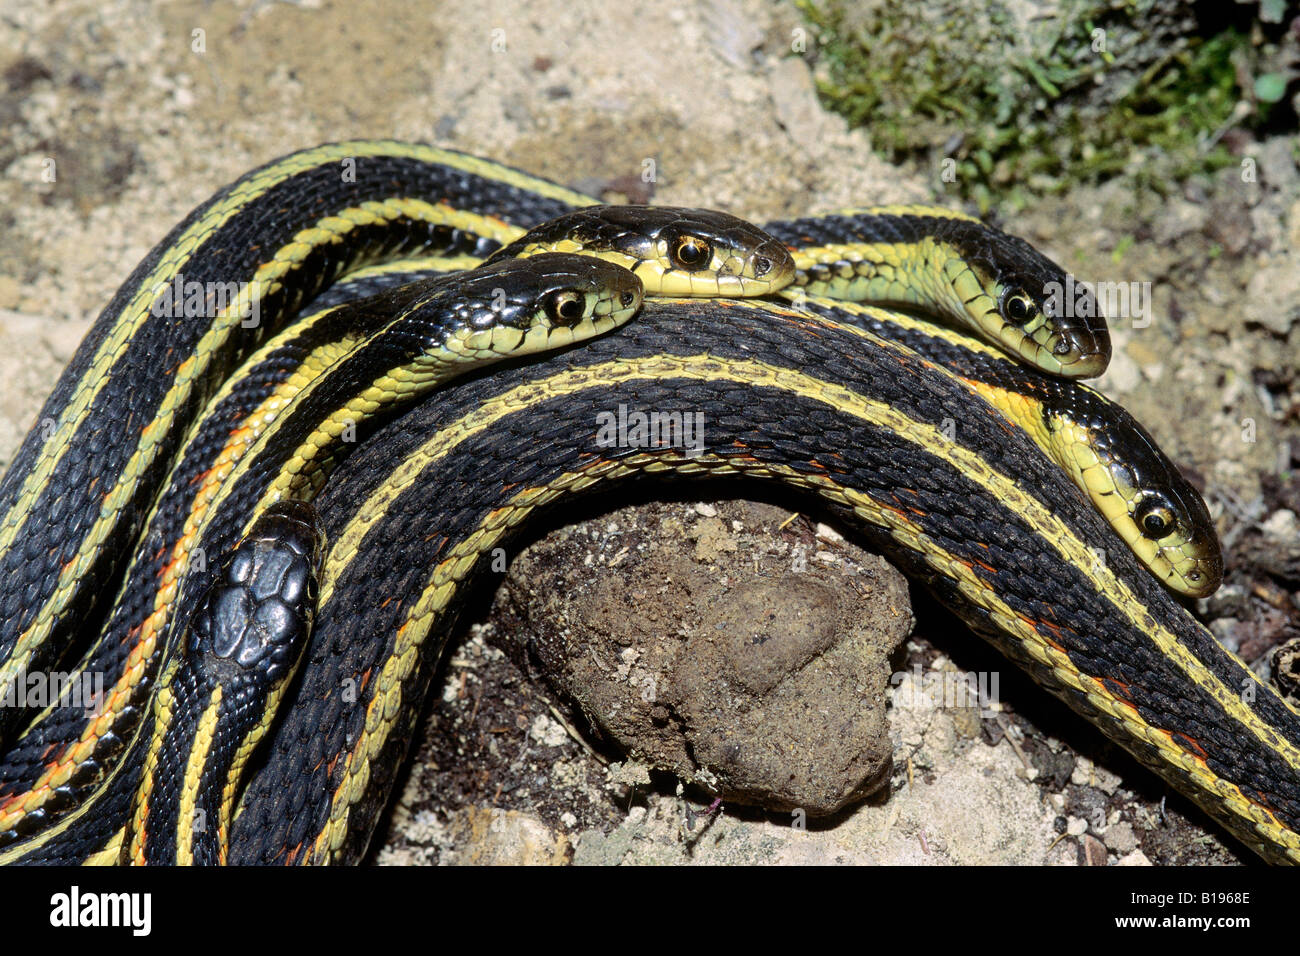 Adult male red-sided garter snakes (Thamnophis sirtalis) court a female during the spring mating season, Manitoba, Canada Stock Photo